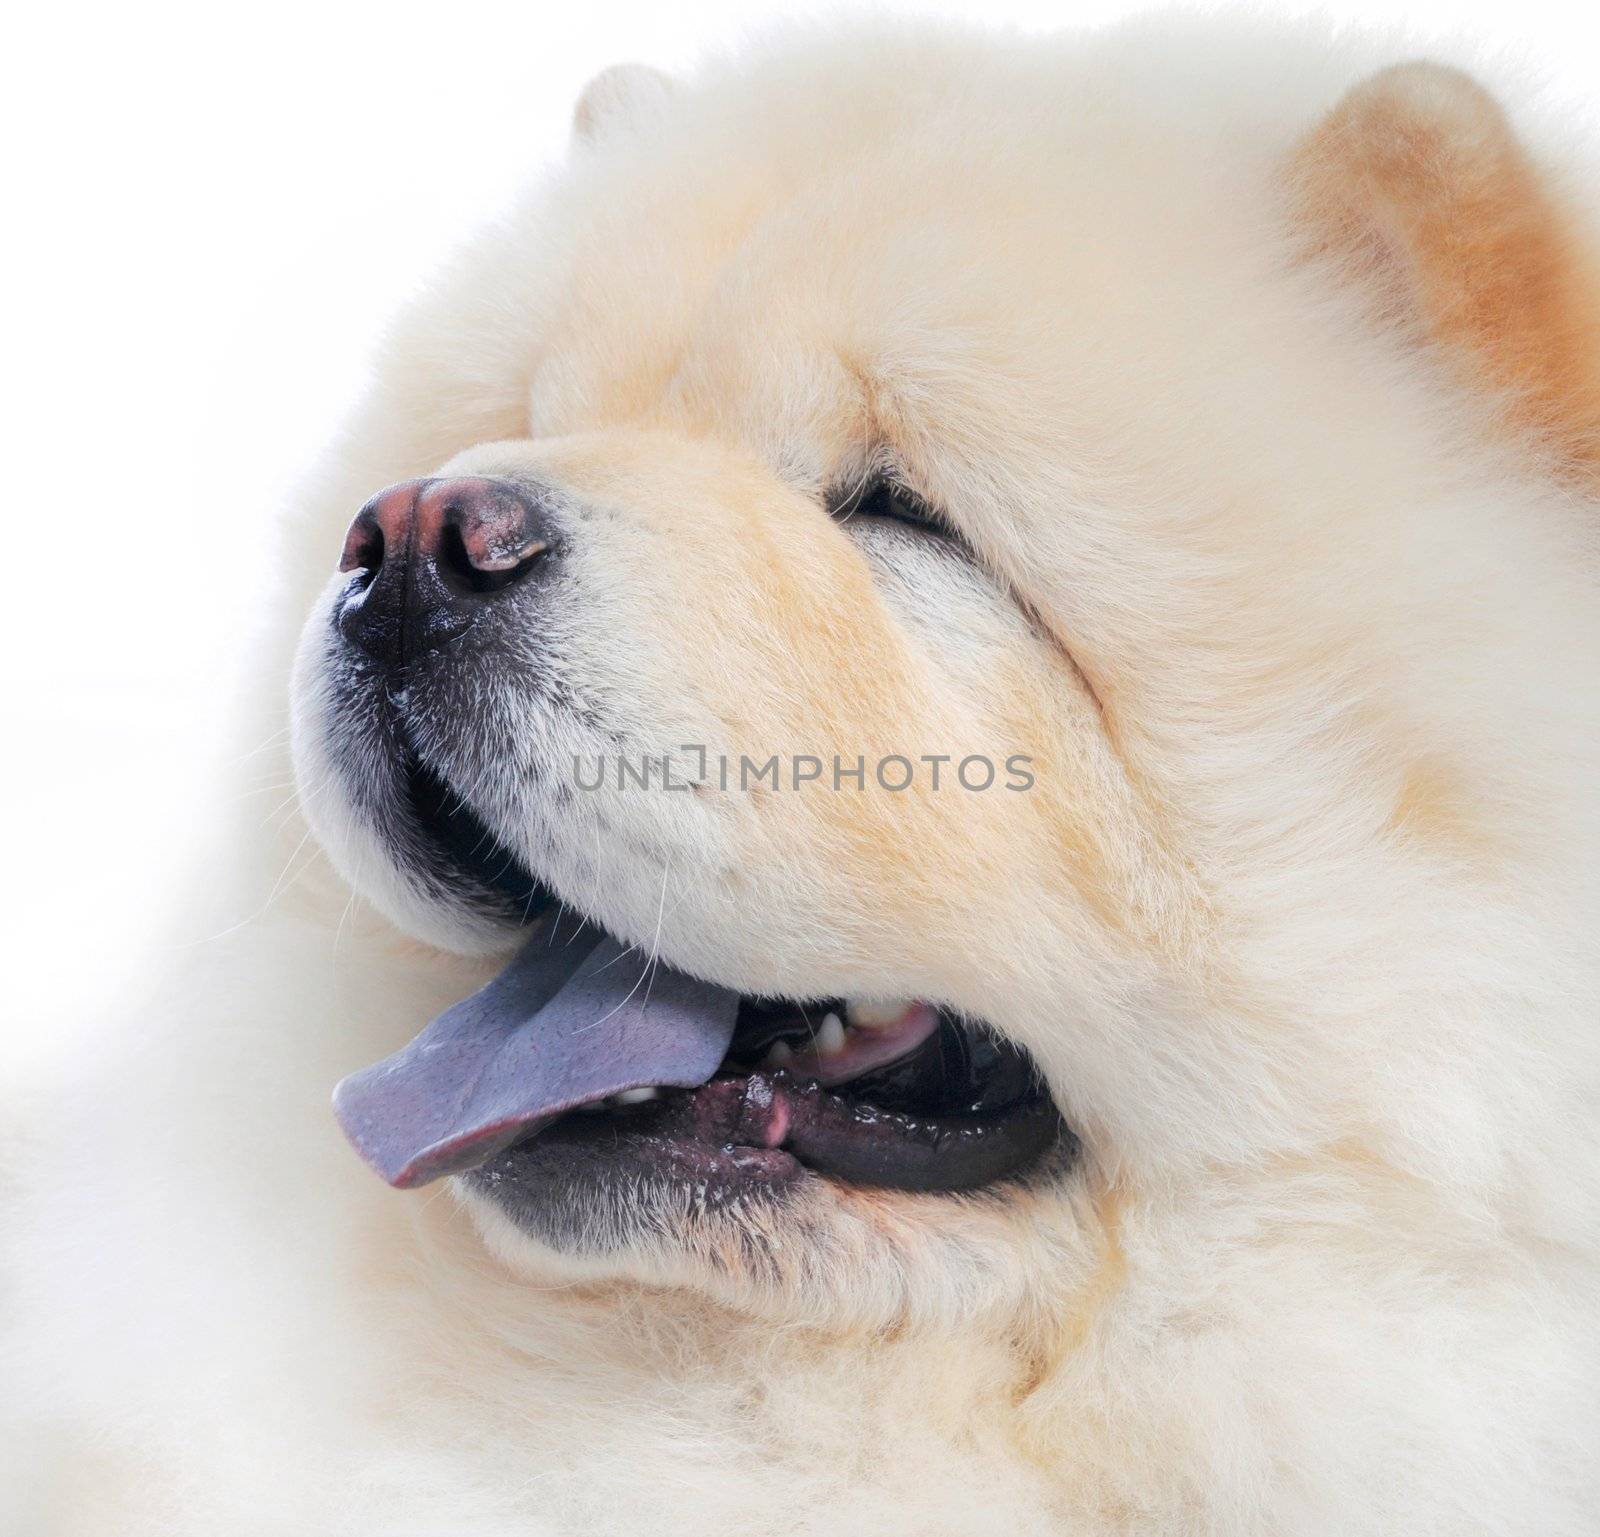 White Chow-Chow in studio on white background